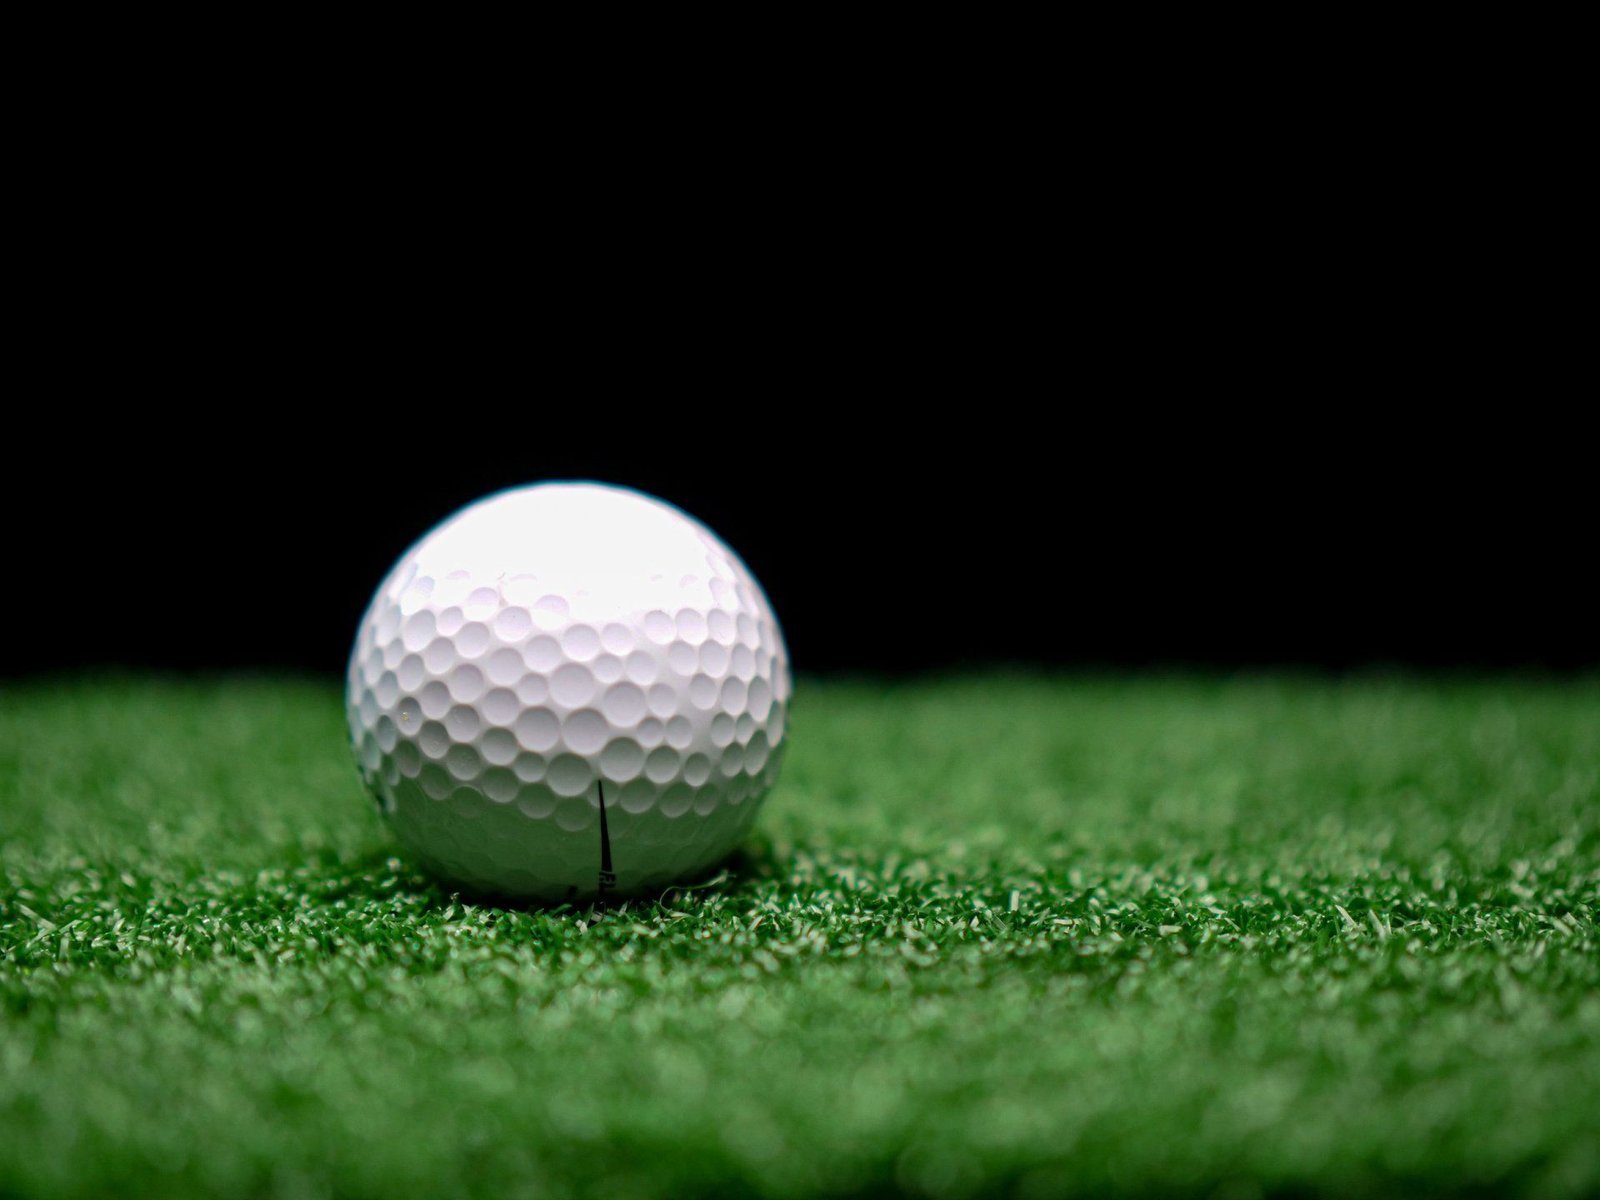 A close-up shot of a white golf ball resting on a backyard putting green in Scottsdale AZ. The background is dark, emphasizing the textured surface and dimples of the golf ball. The grass appears well-manicured, thanks to professional Golf Green Installers, highlighting the ball in the center of the image.